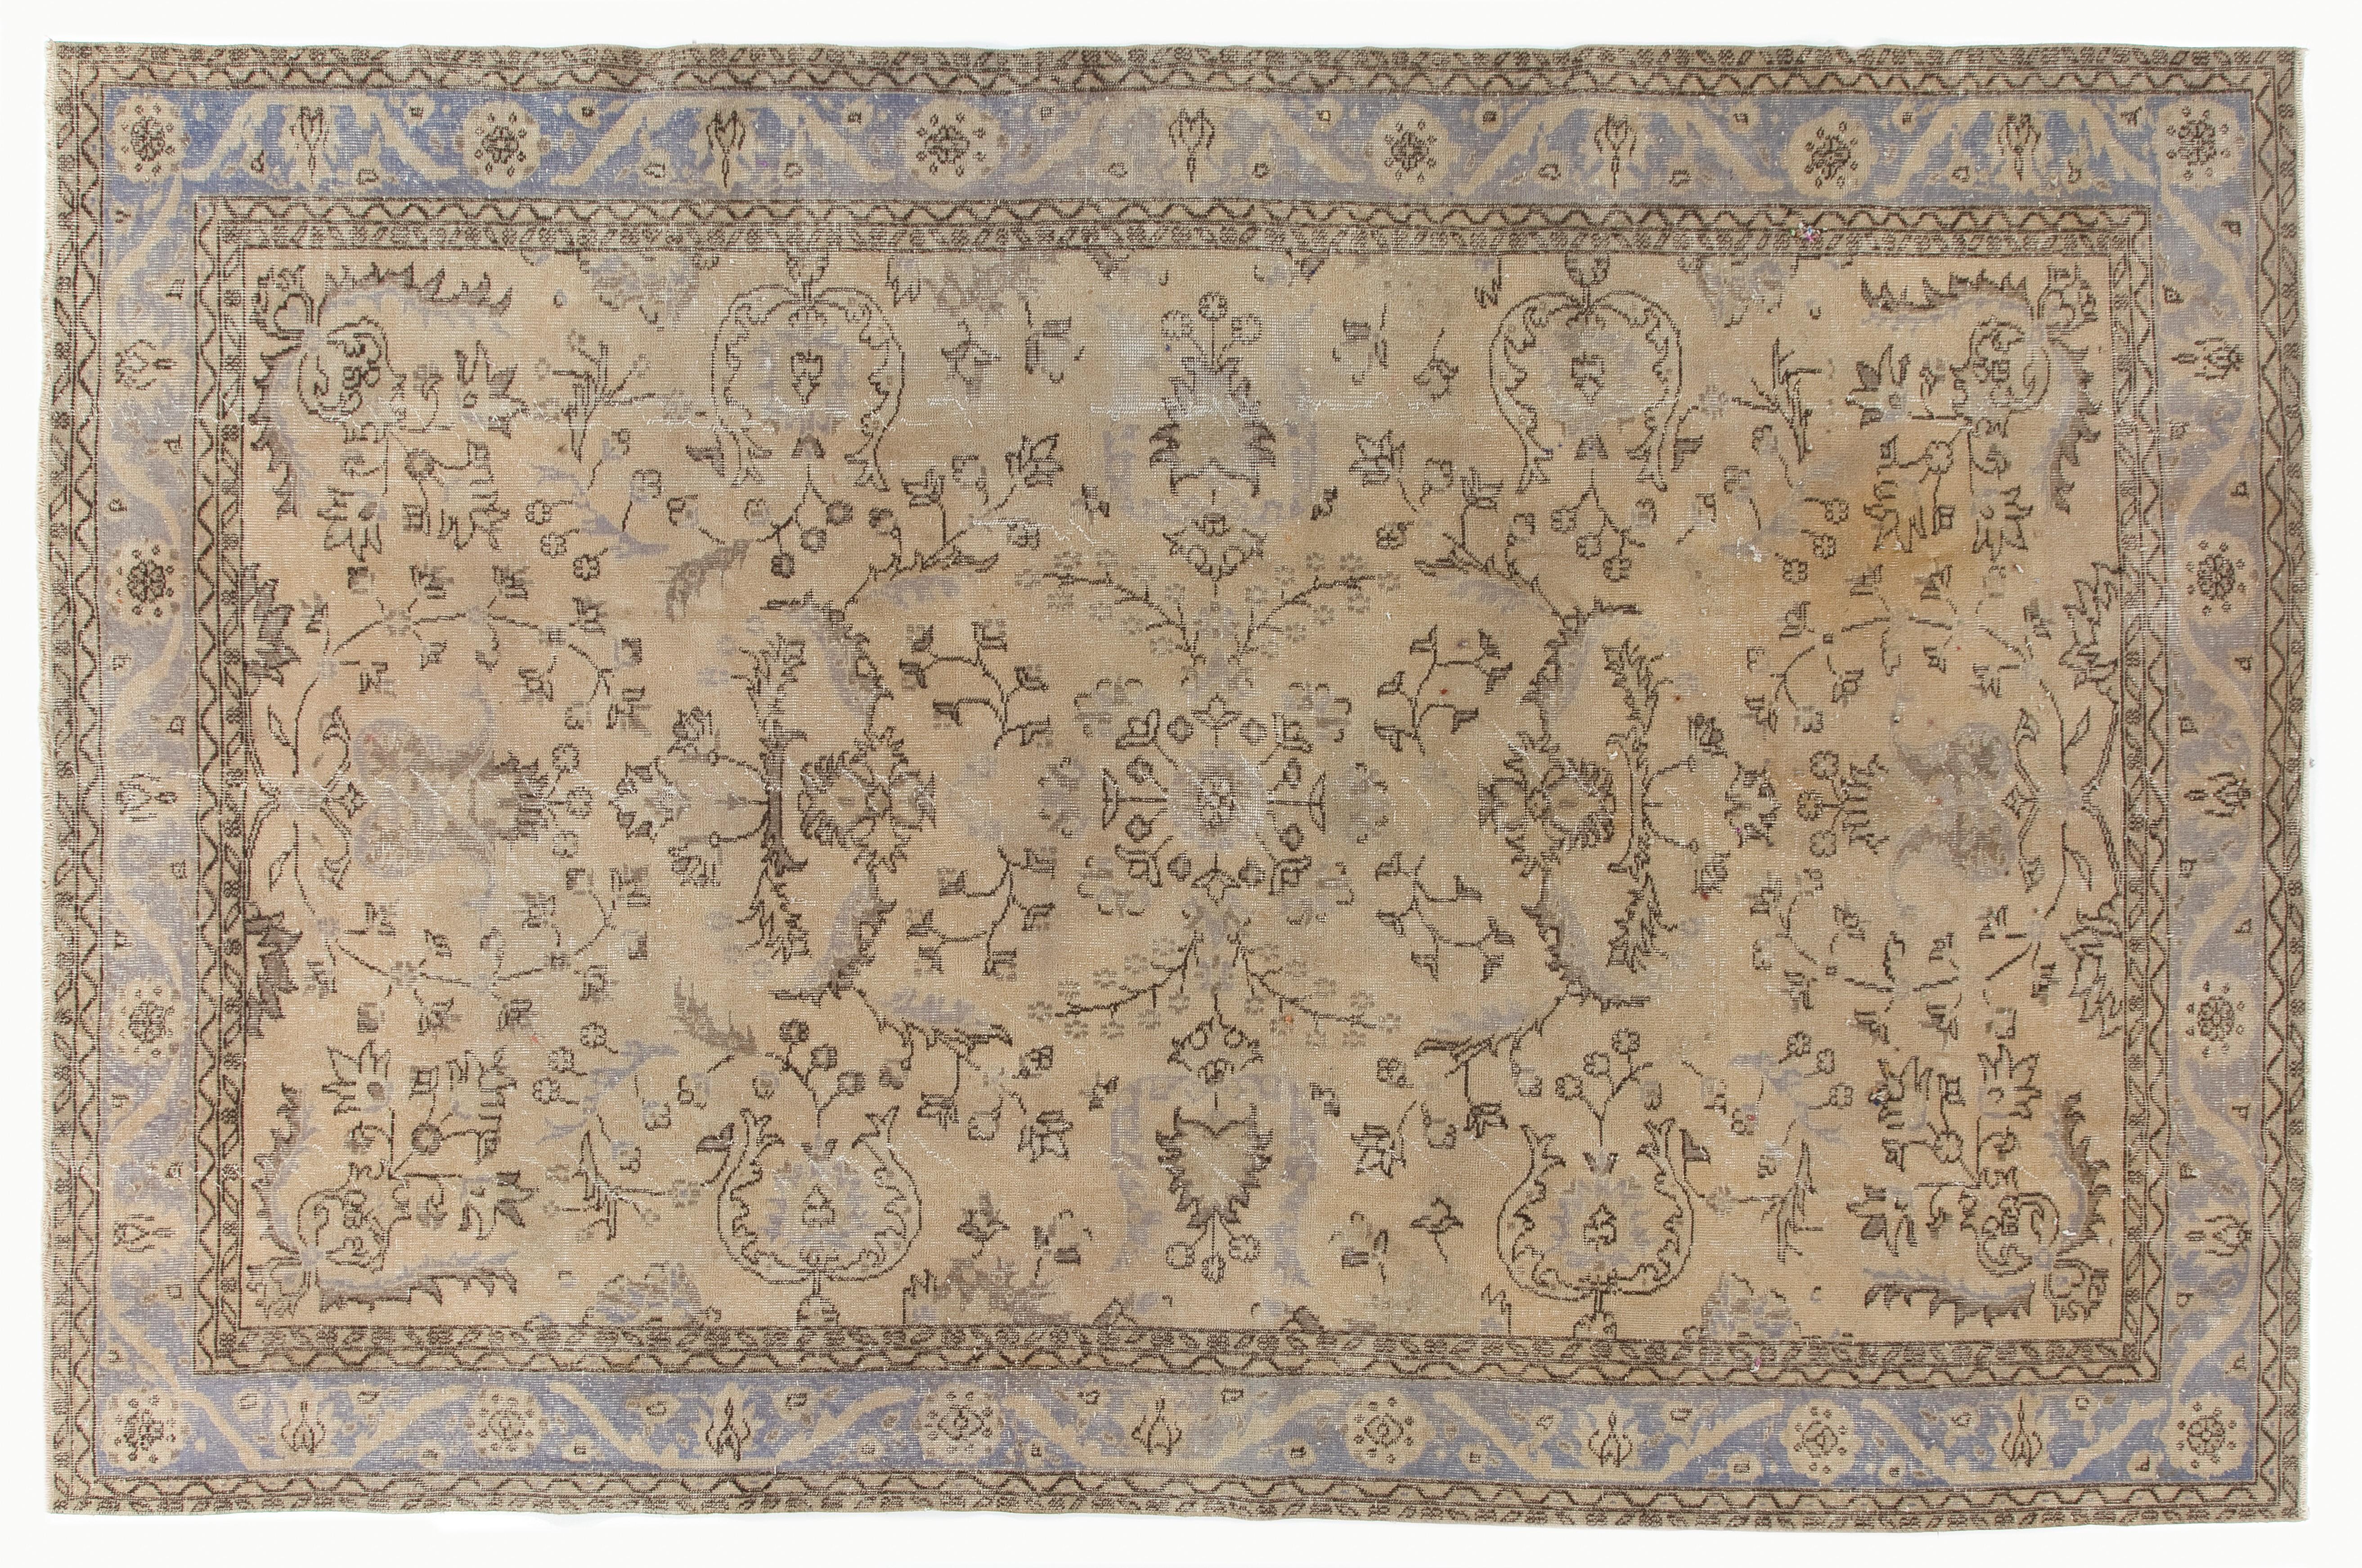 A vintage hand knotted Turkish Oushak rug in a very soft, muted palette of beige, khaki, ecru, tan, fawn and dark steel blue. The rug features two floral medallions at both ends of the field that is filled with symmetrically placed floral vines